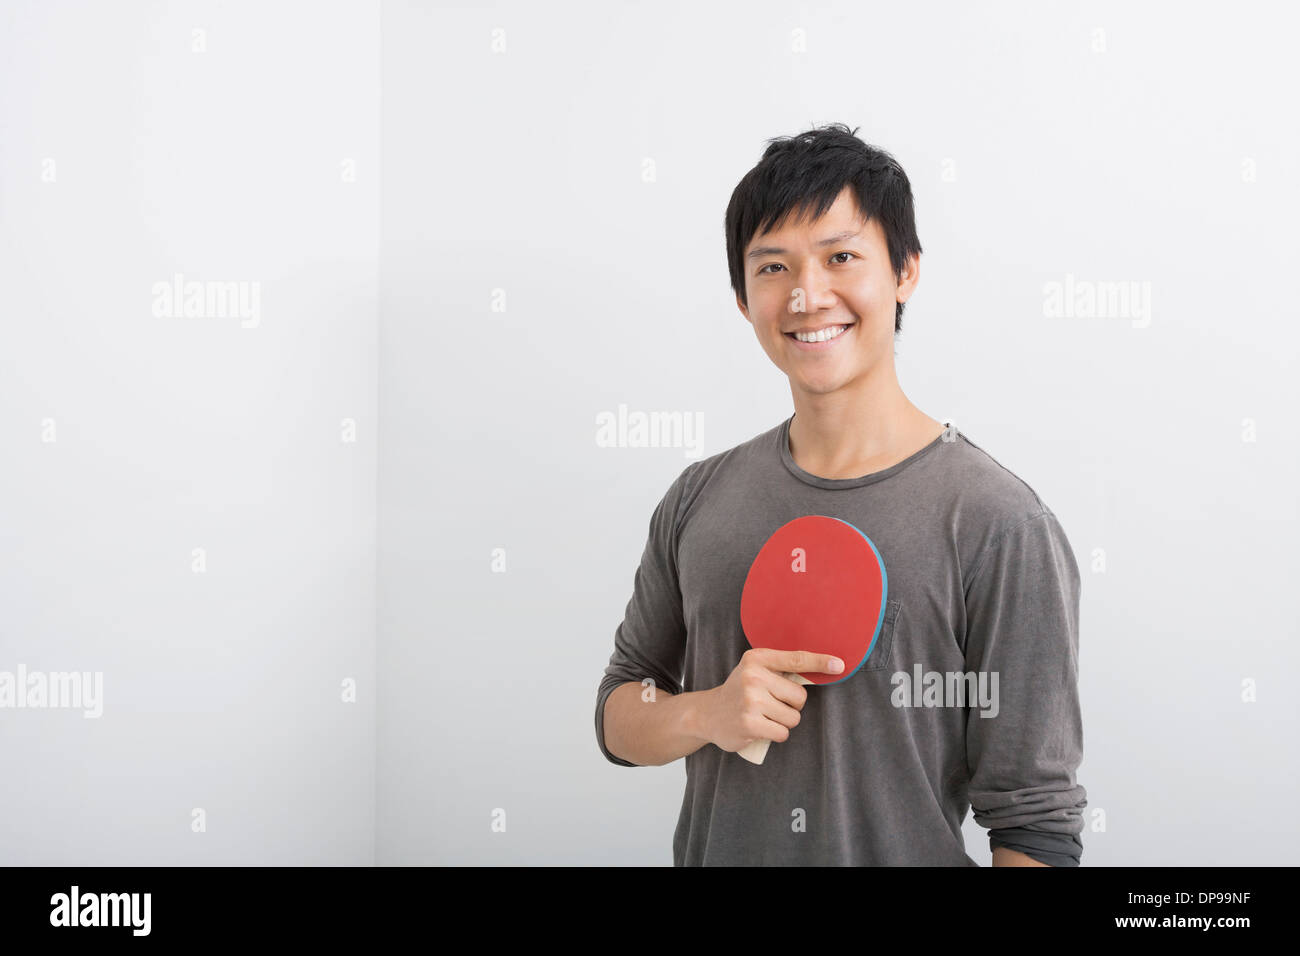 Portrait of happy mid adult man holding table tennis paddle Stock Photo